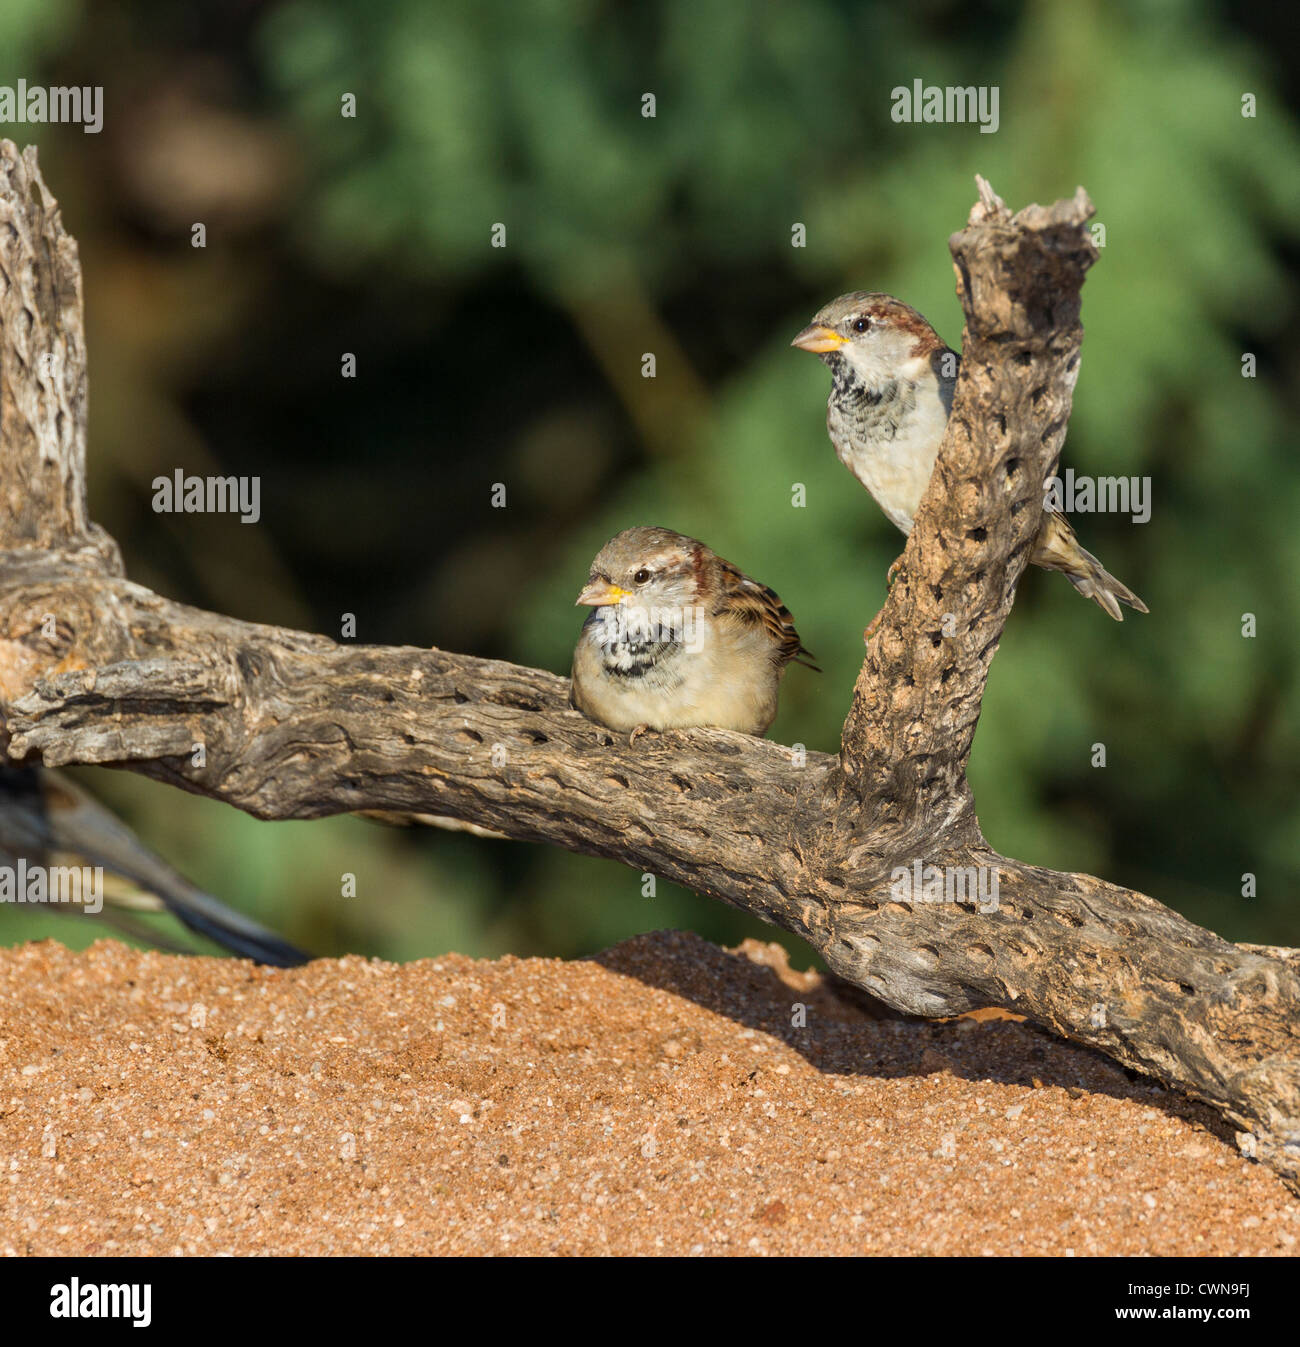 House Sparrows, Passer domesticus, also known as English Sparrow, perched on Cane Cholla cactus in the Sonoran Desert in Southern Arizona. Stock Photo